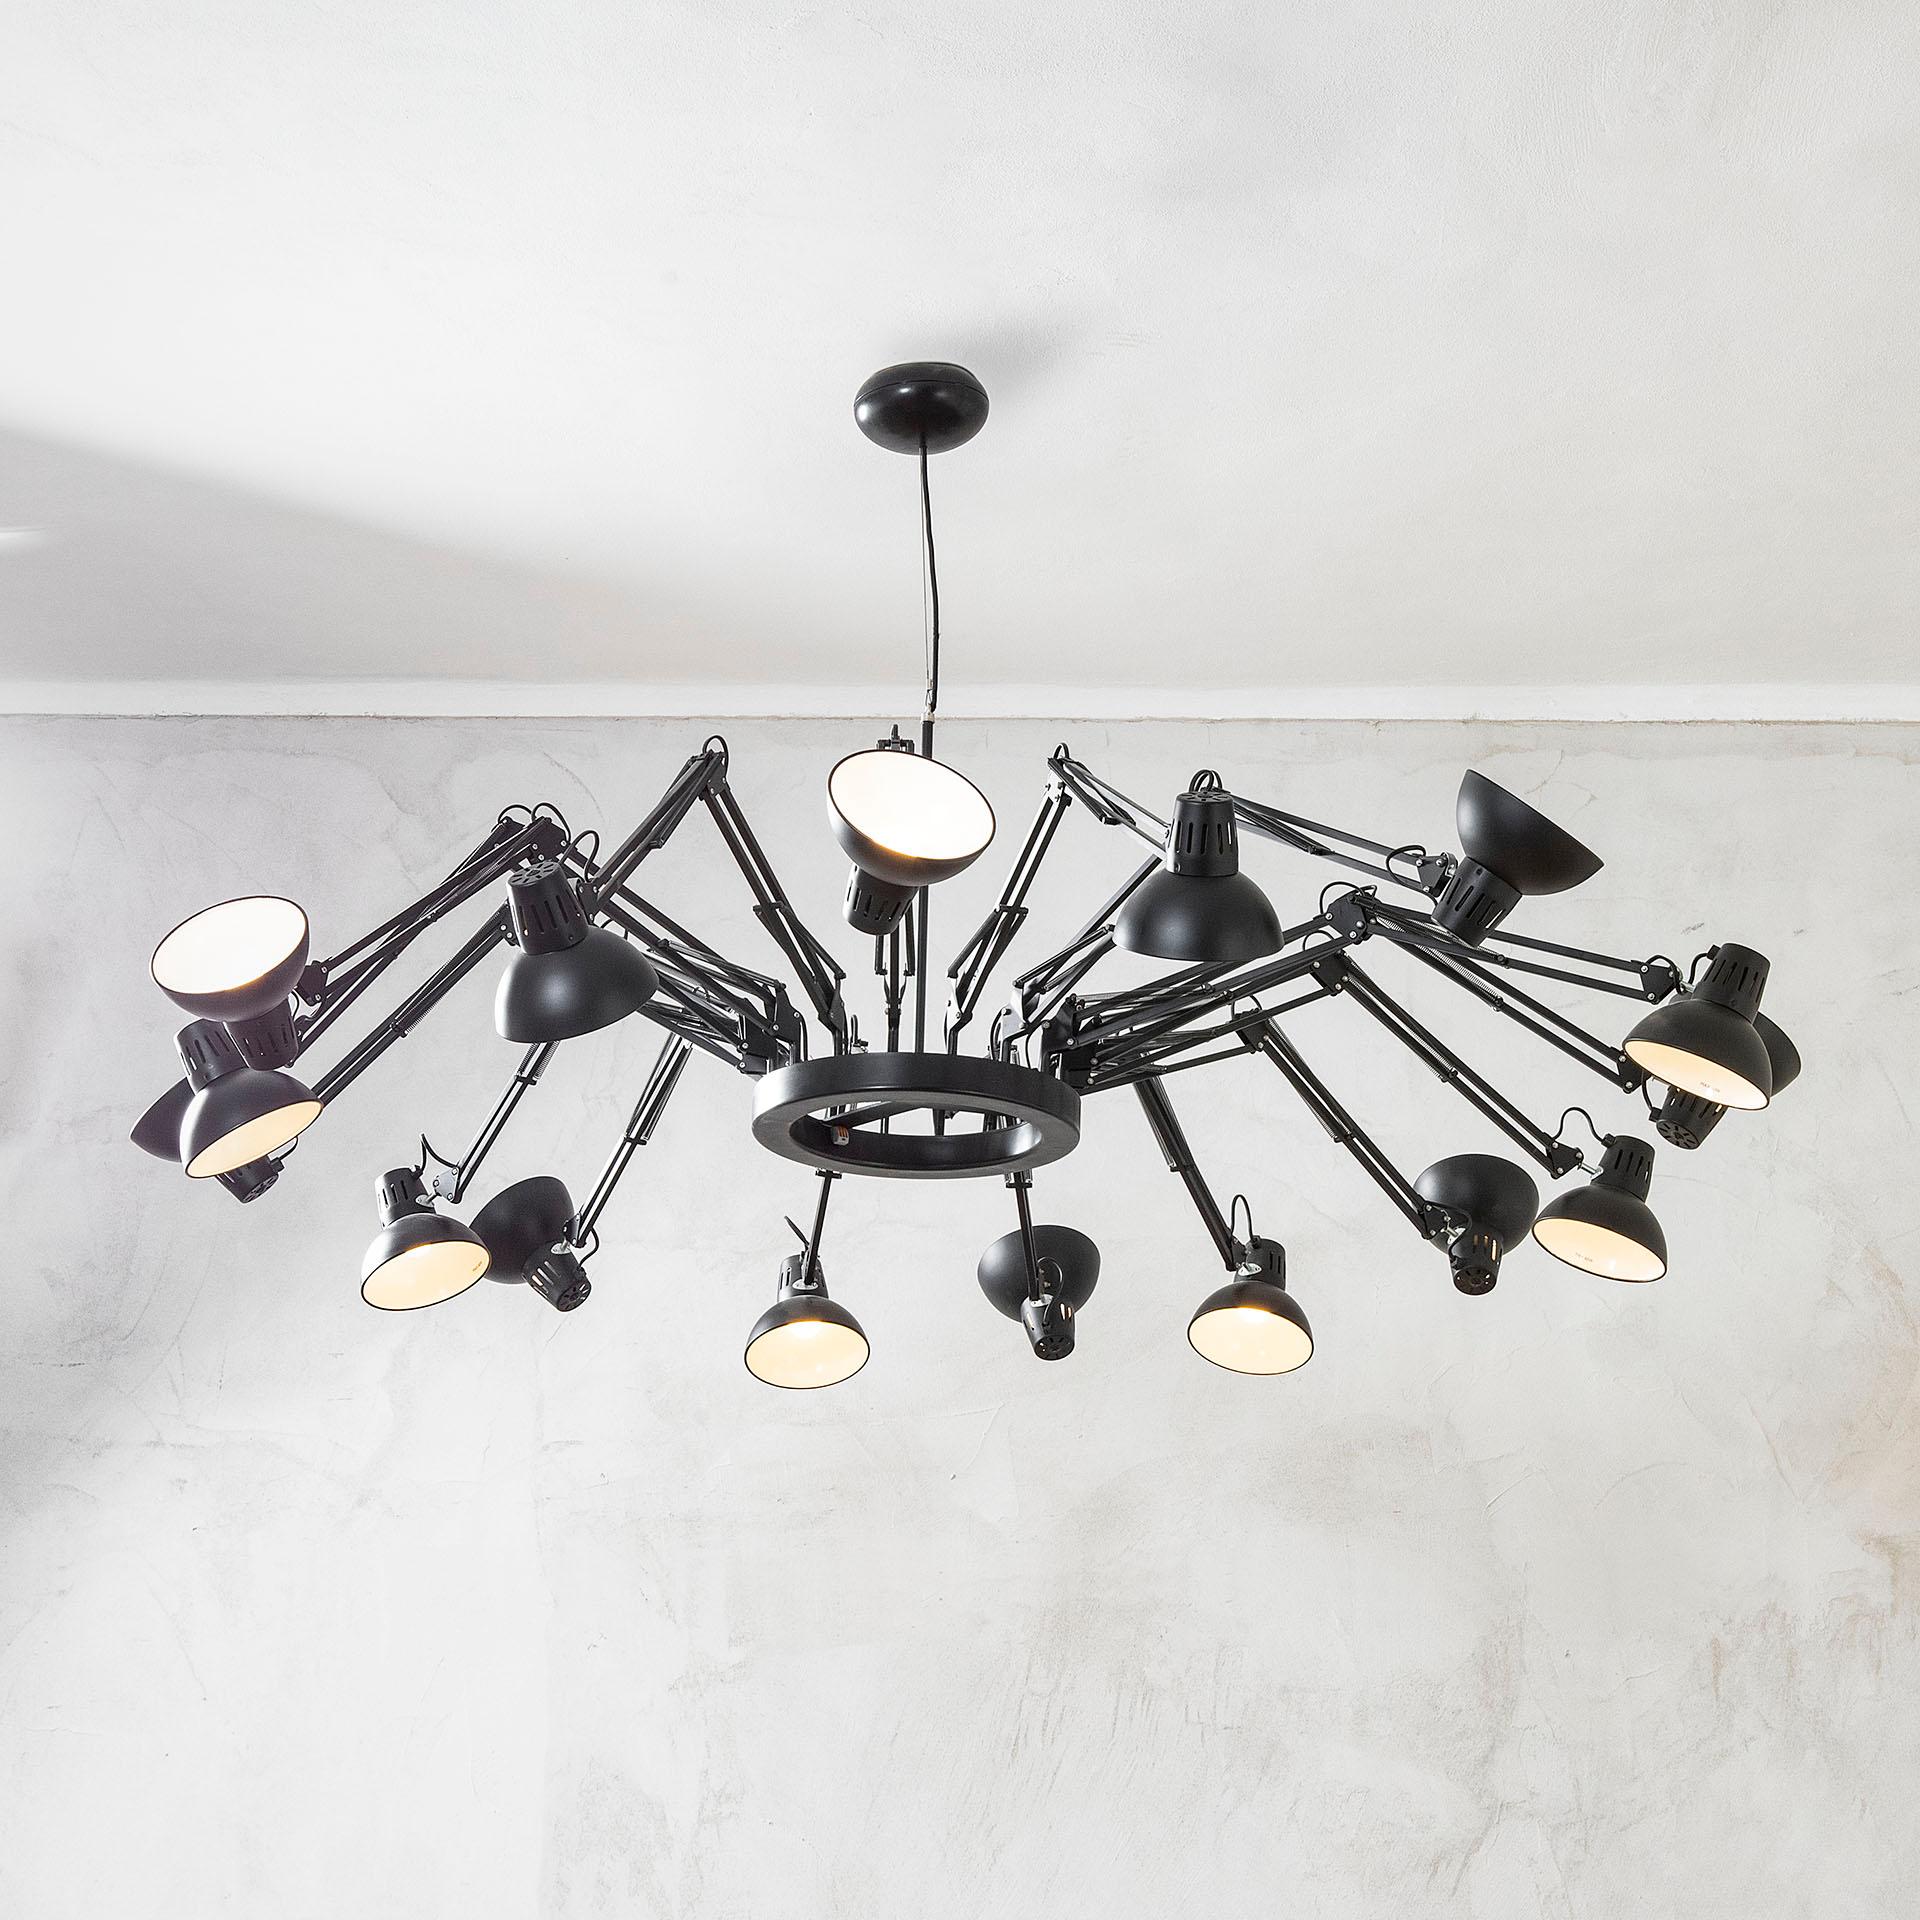 Modern Ron Gilad Chandelier Mod. Dear Ingo for Moooi with 16 Directional Diffusers For Sale